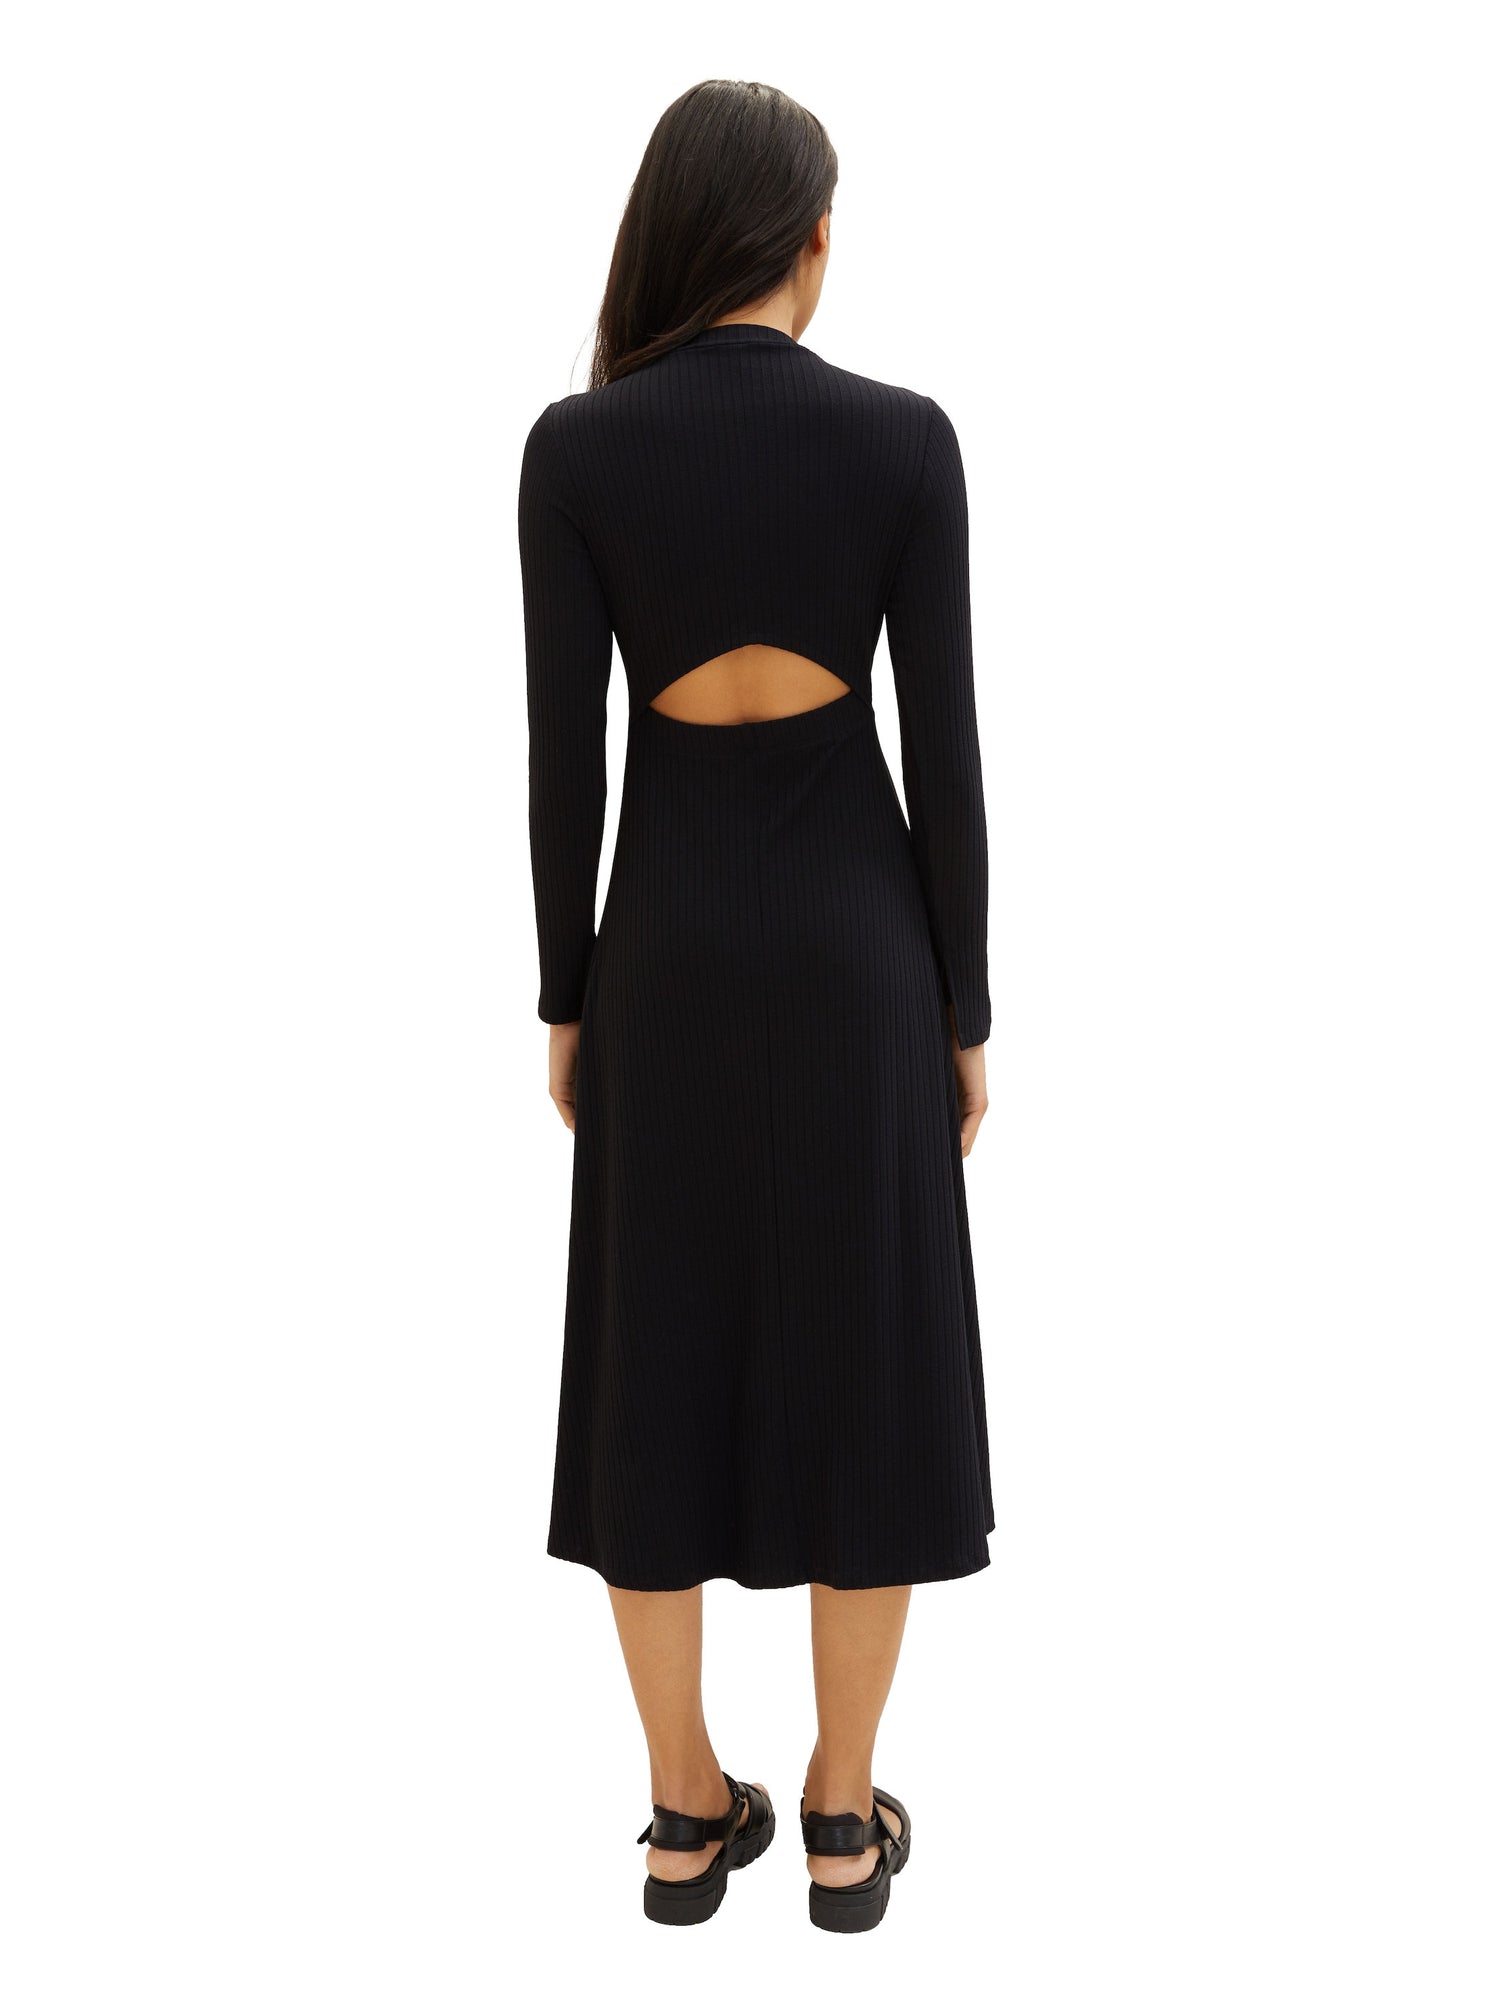 Long Sleeve Midi Dress With Back Cut Out_1038140_14482_04